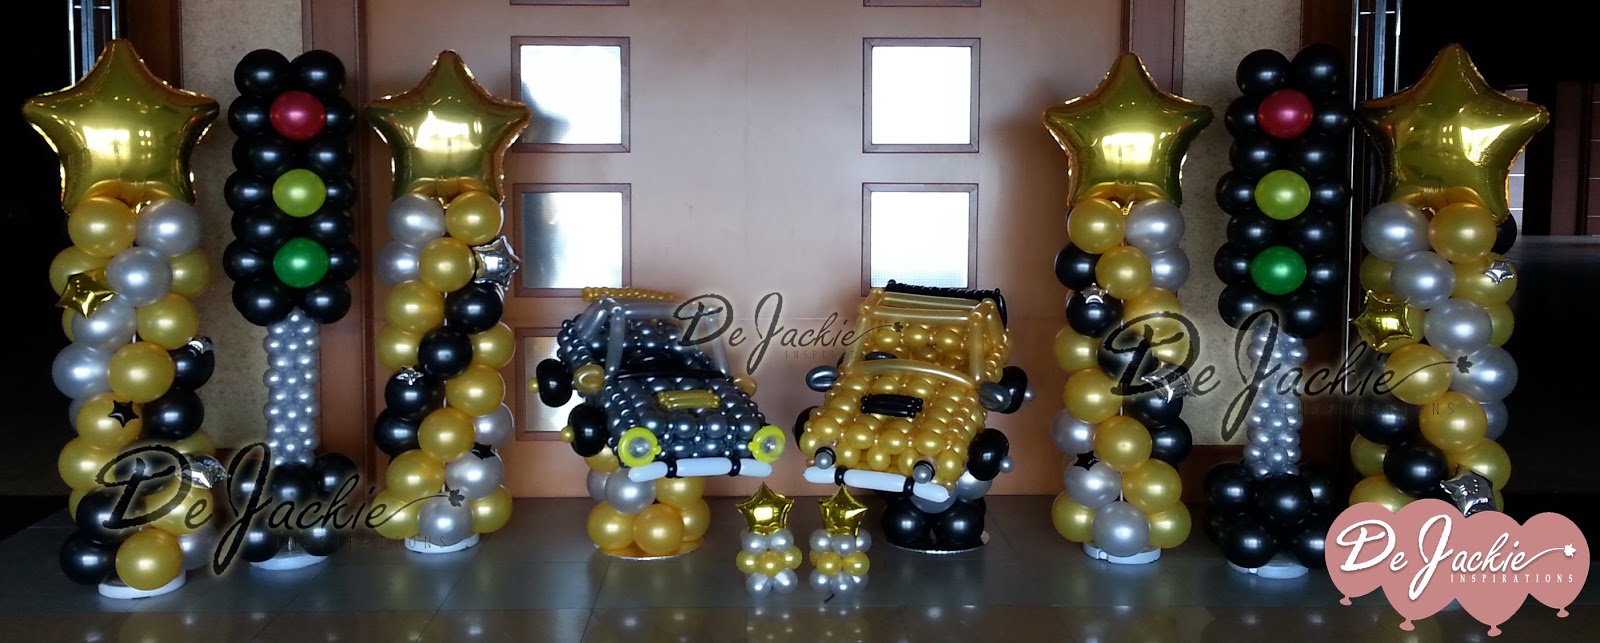 Balloon decorations  for weddings birthday  parties 